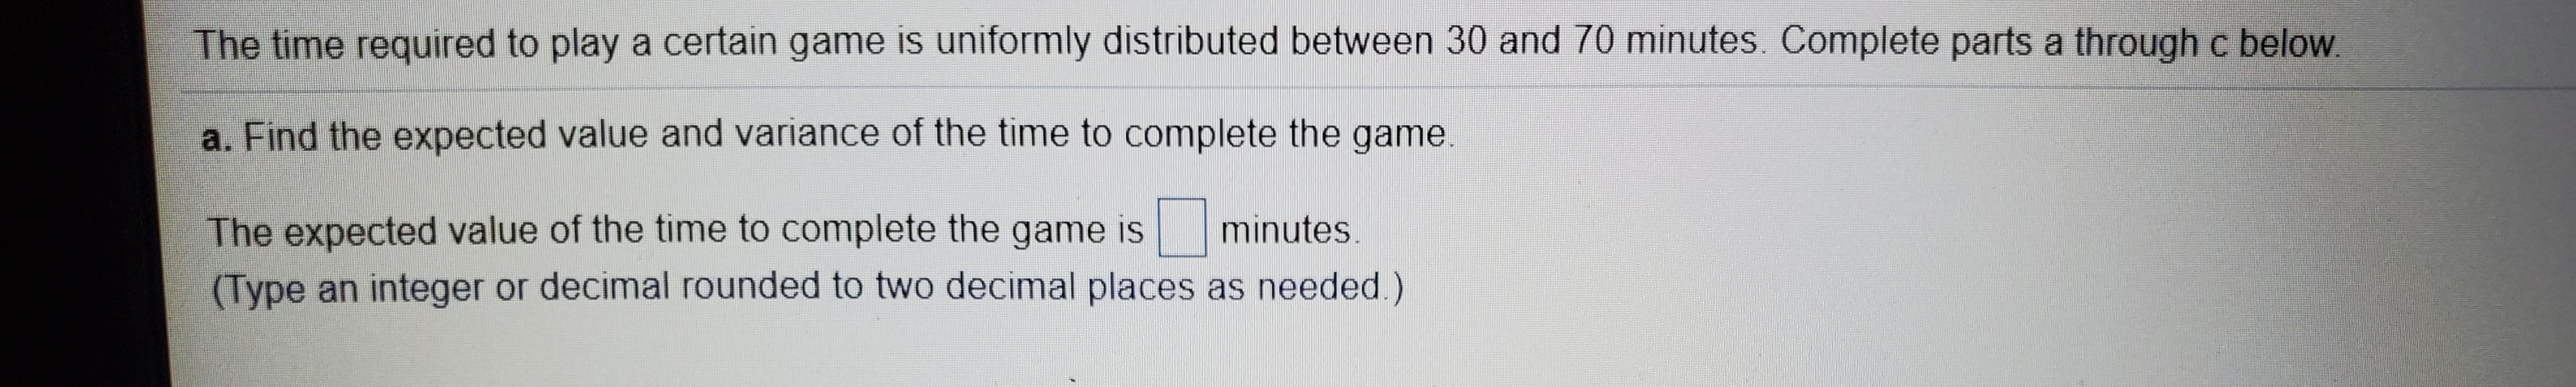 The time required to play a certain game is uniformly distributed between 30 and 70 minutes. Complete parts a through c below.
a. Find the expected value and variance of the time to complete the game.
The expected value of the time to complete the game is
(Type an integer or decimal rounded to two decimal places as needed.)
minutes.
